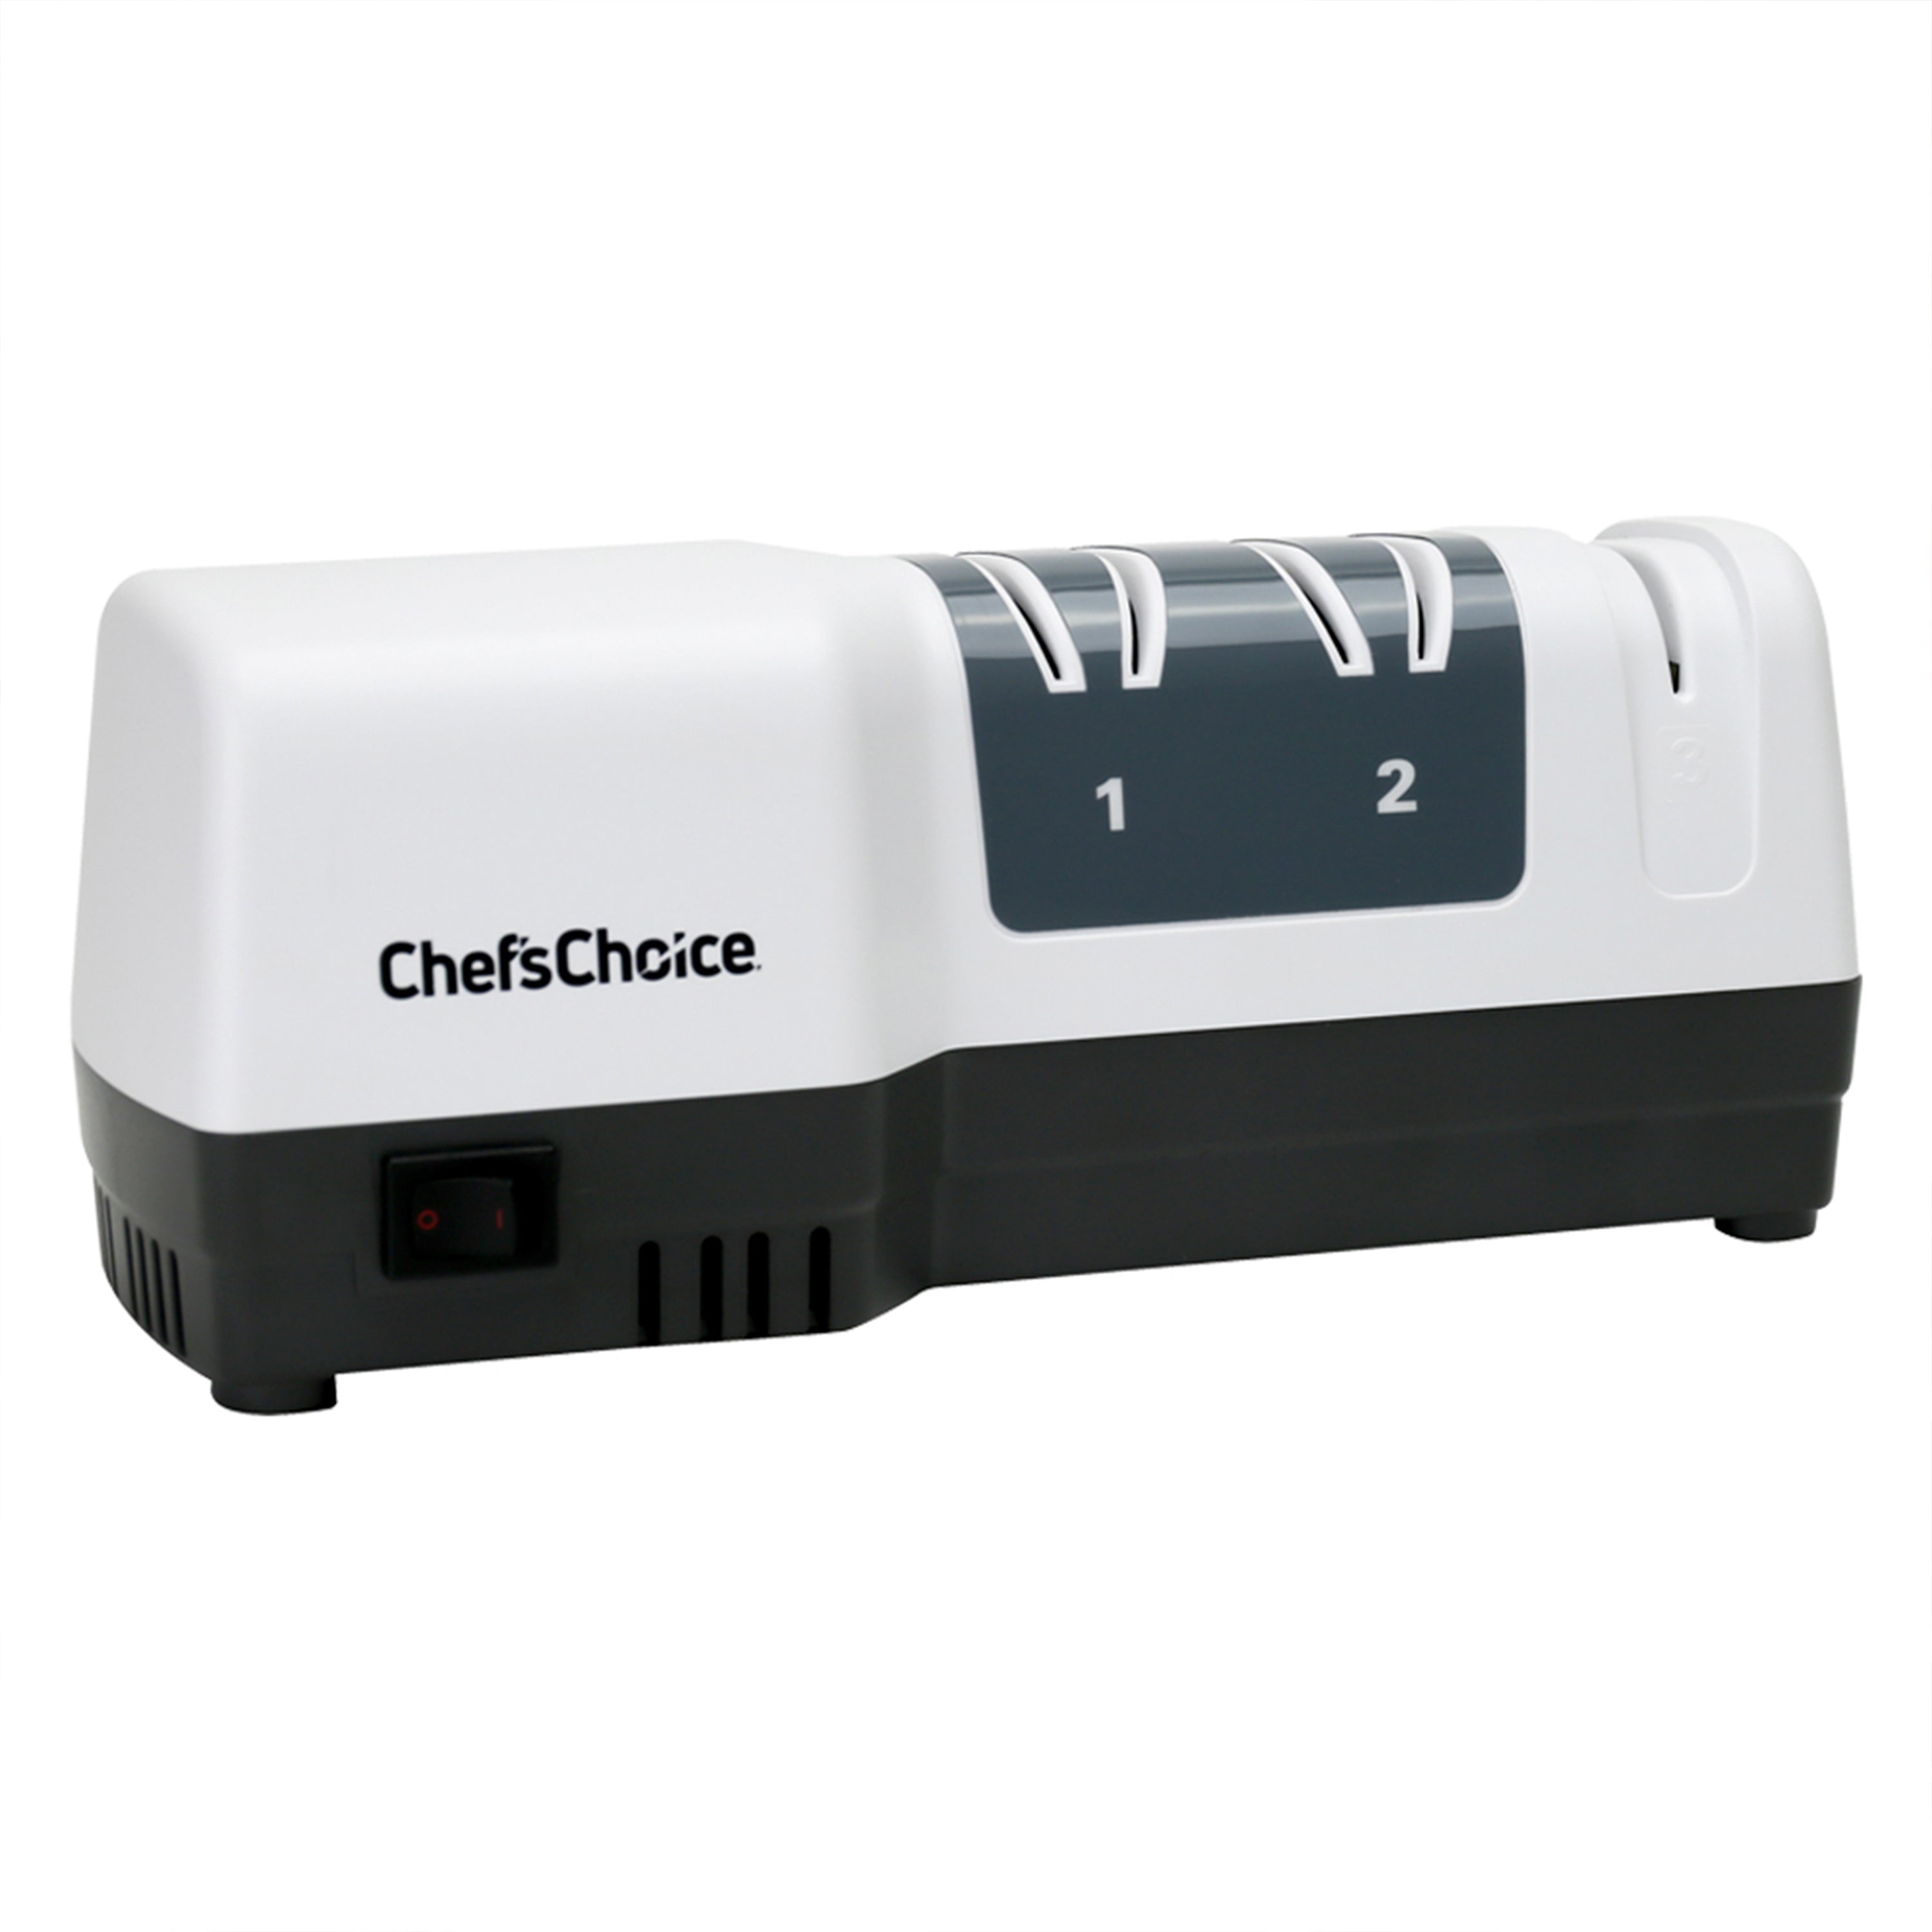 DEAL OF THE DAY: Save 52% on Chef'sChoice Professional Electric